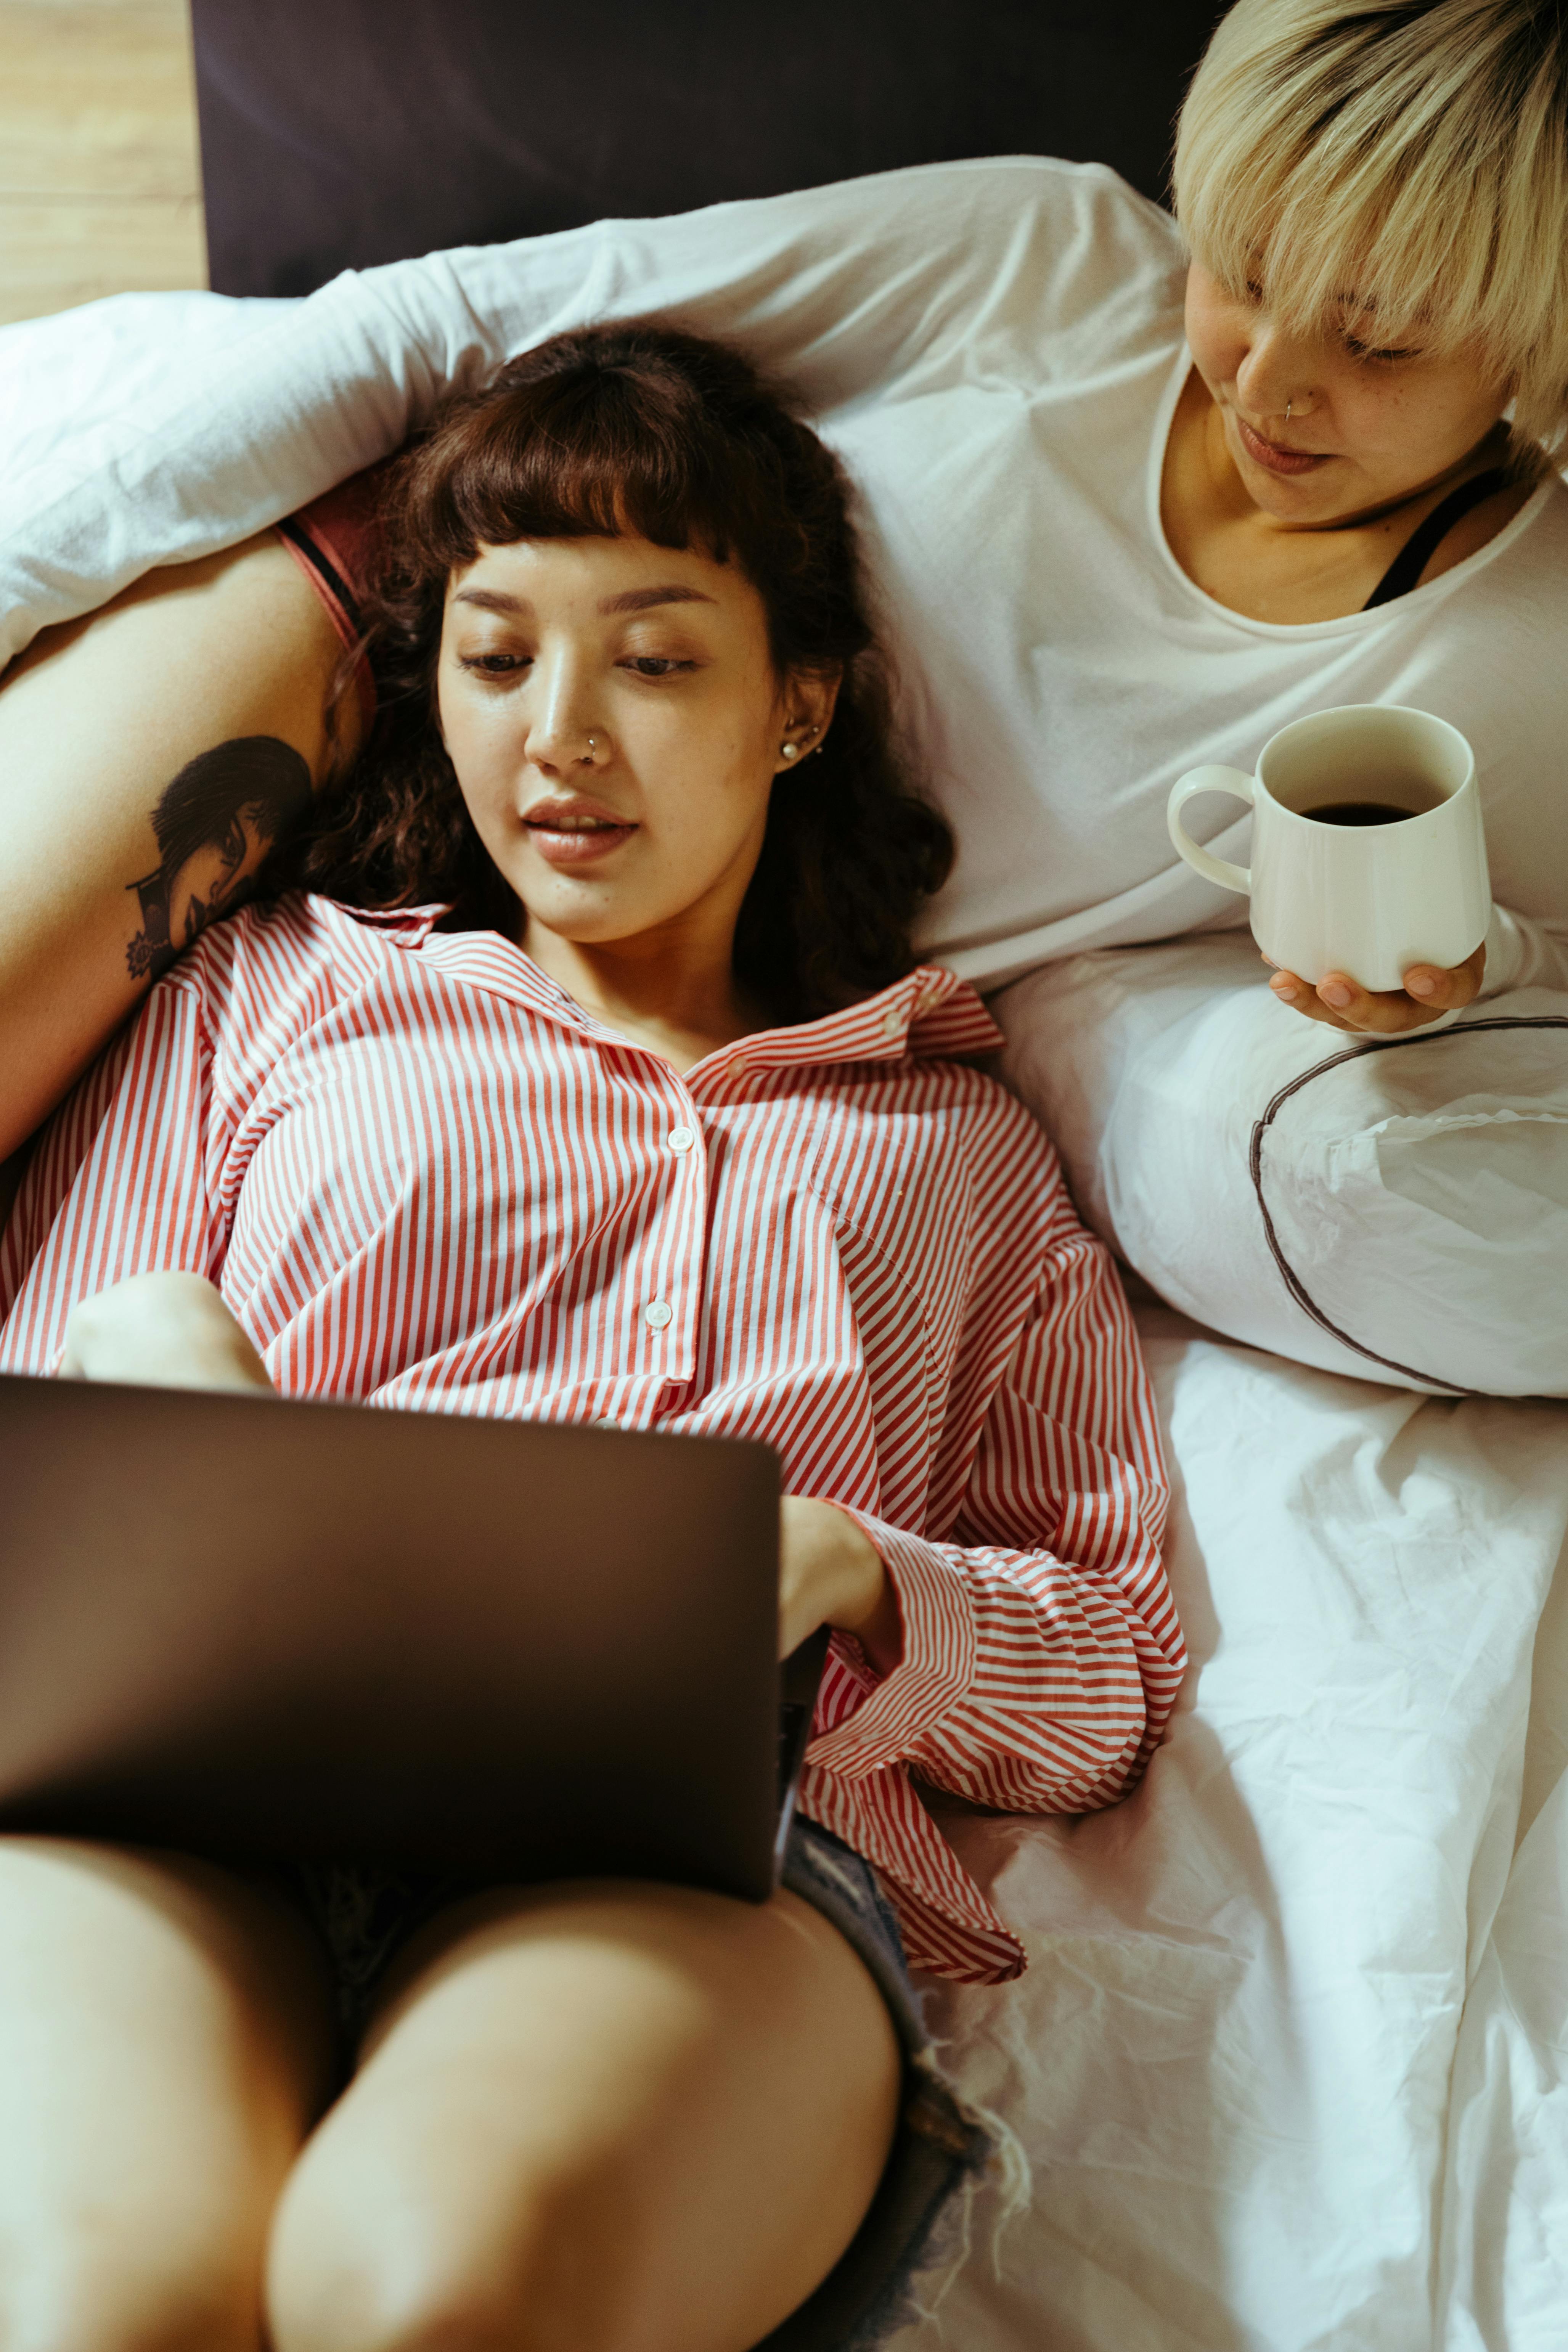 woman in bed using a laptop and reclining on her girlfriend